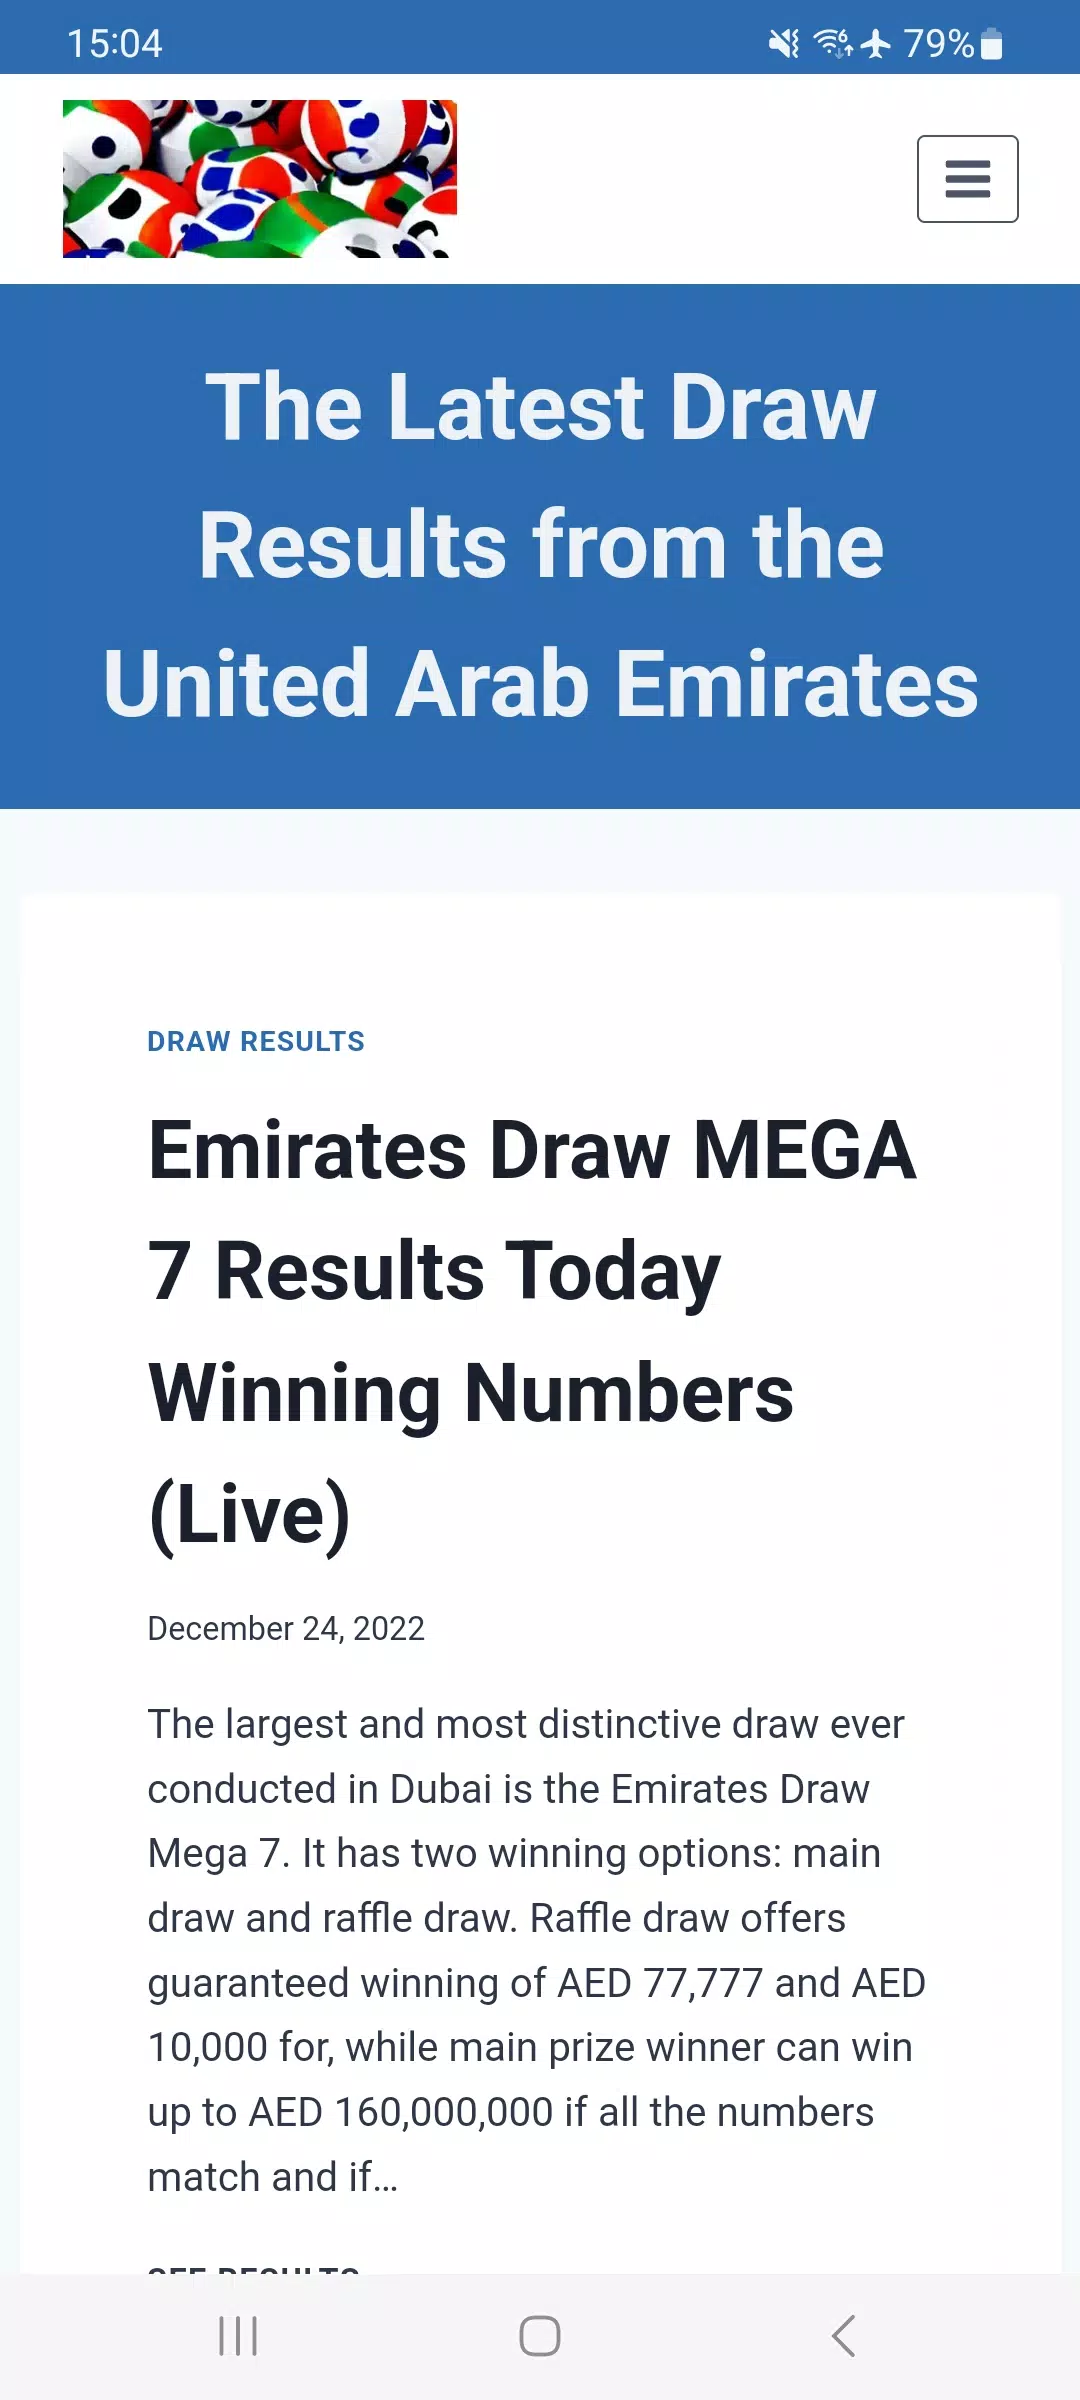 GoWin Results - Super 6 UAE - Apps on Google Play